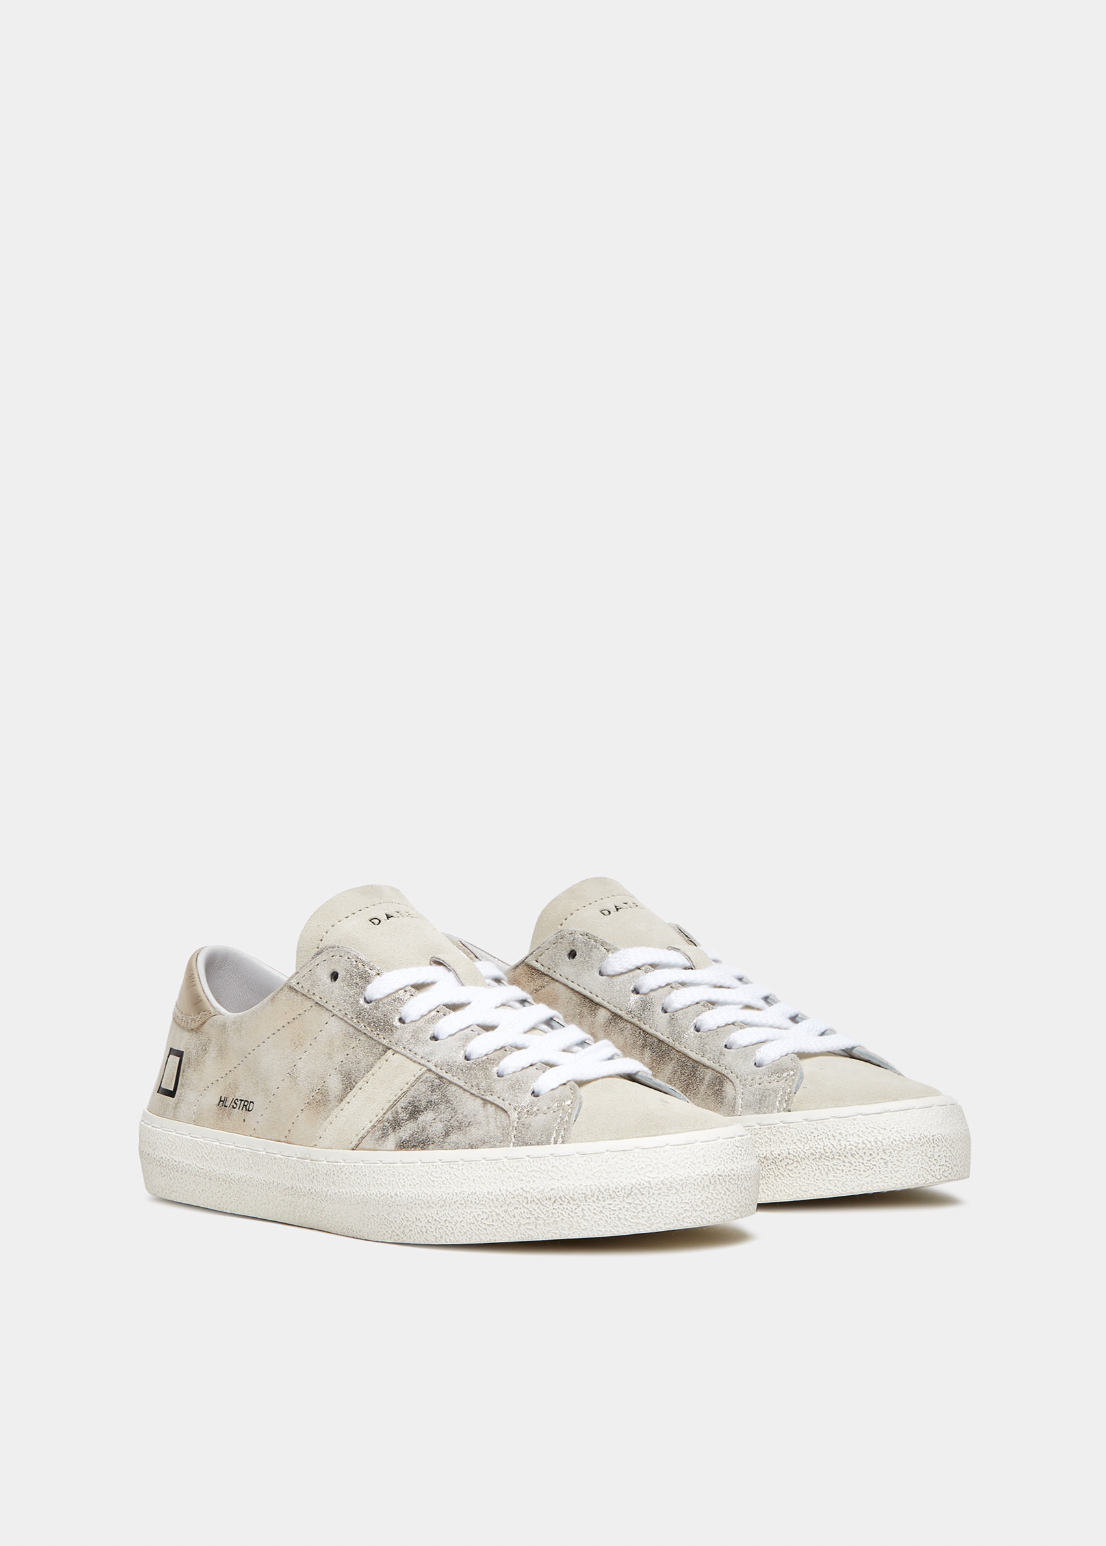 Hill Low Leather Trainers Stardust Platinum